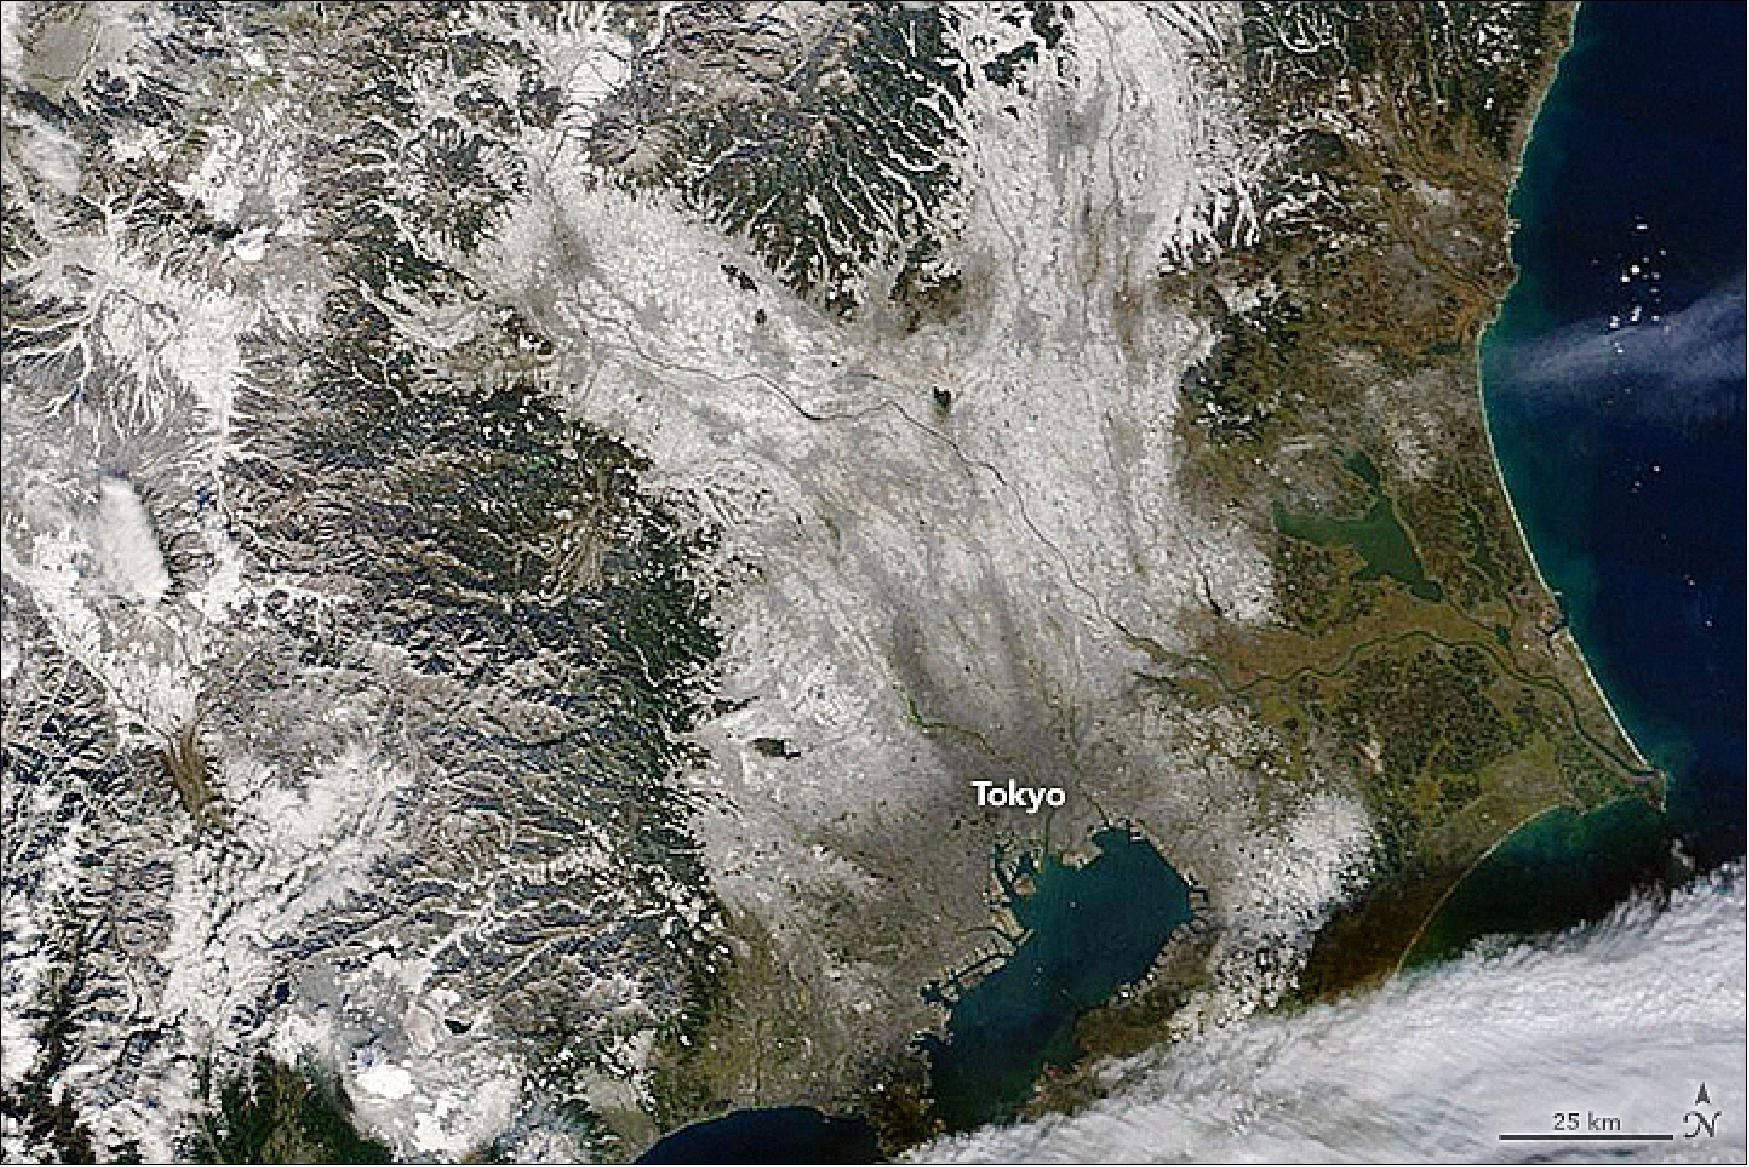 Figure 77: Snow-covered Tokyo region as acquired by the MODIS instrument on November 25, 2016 (image credit: NASA Earth Observatory, image by Joshua Stevens)